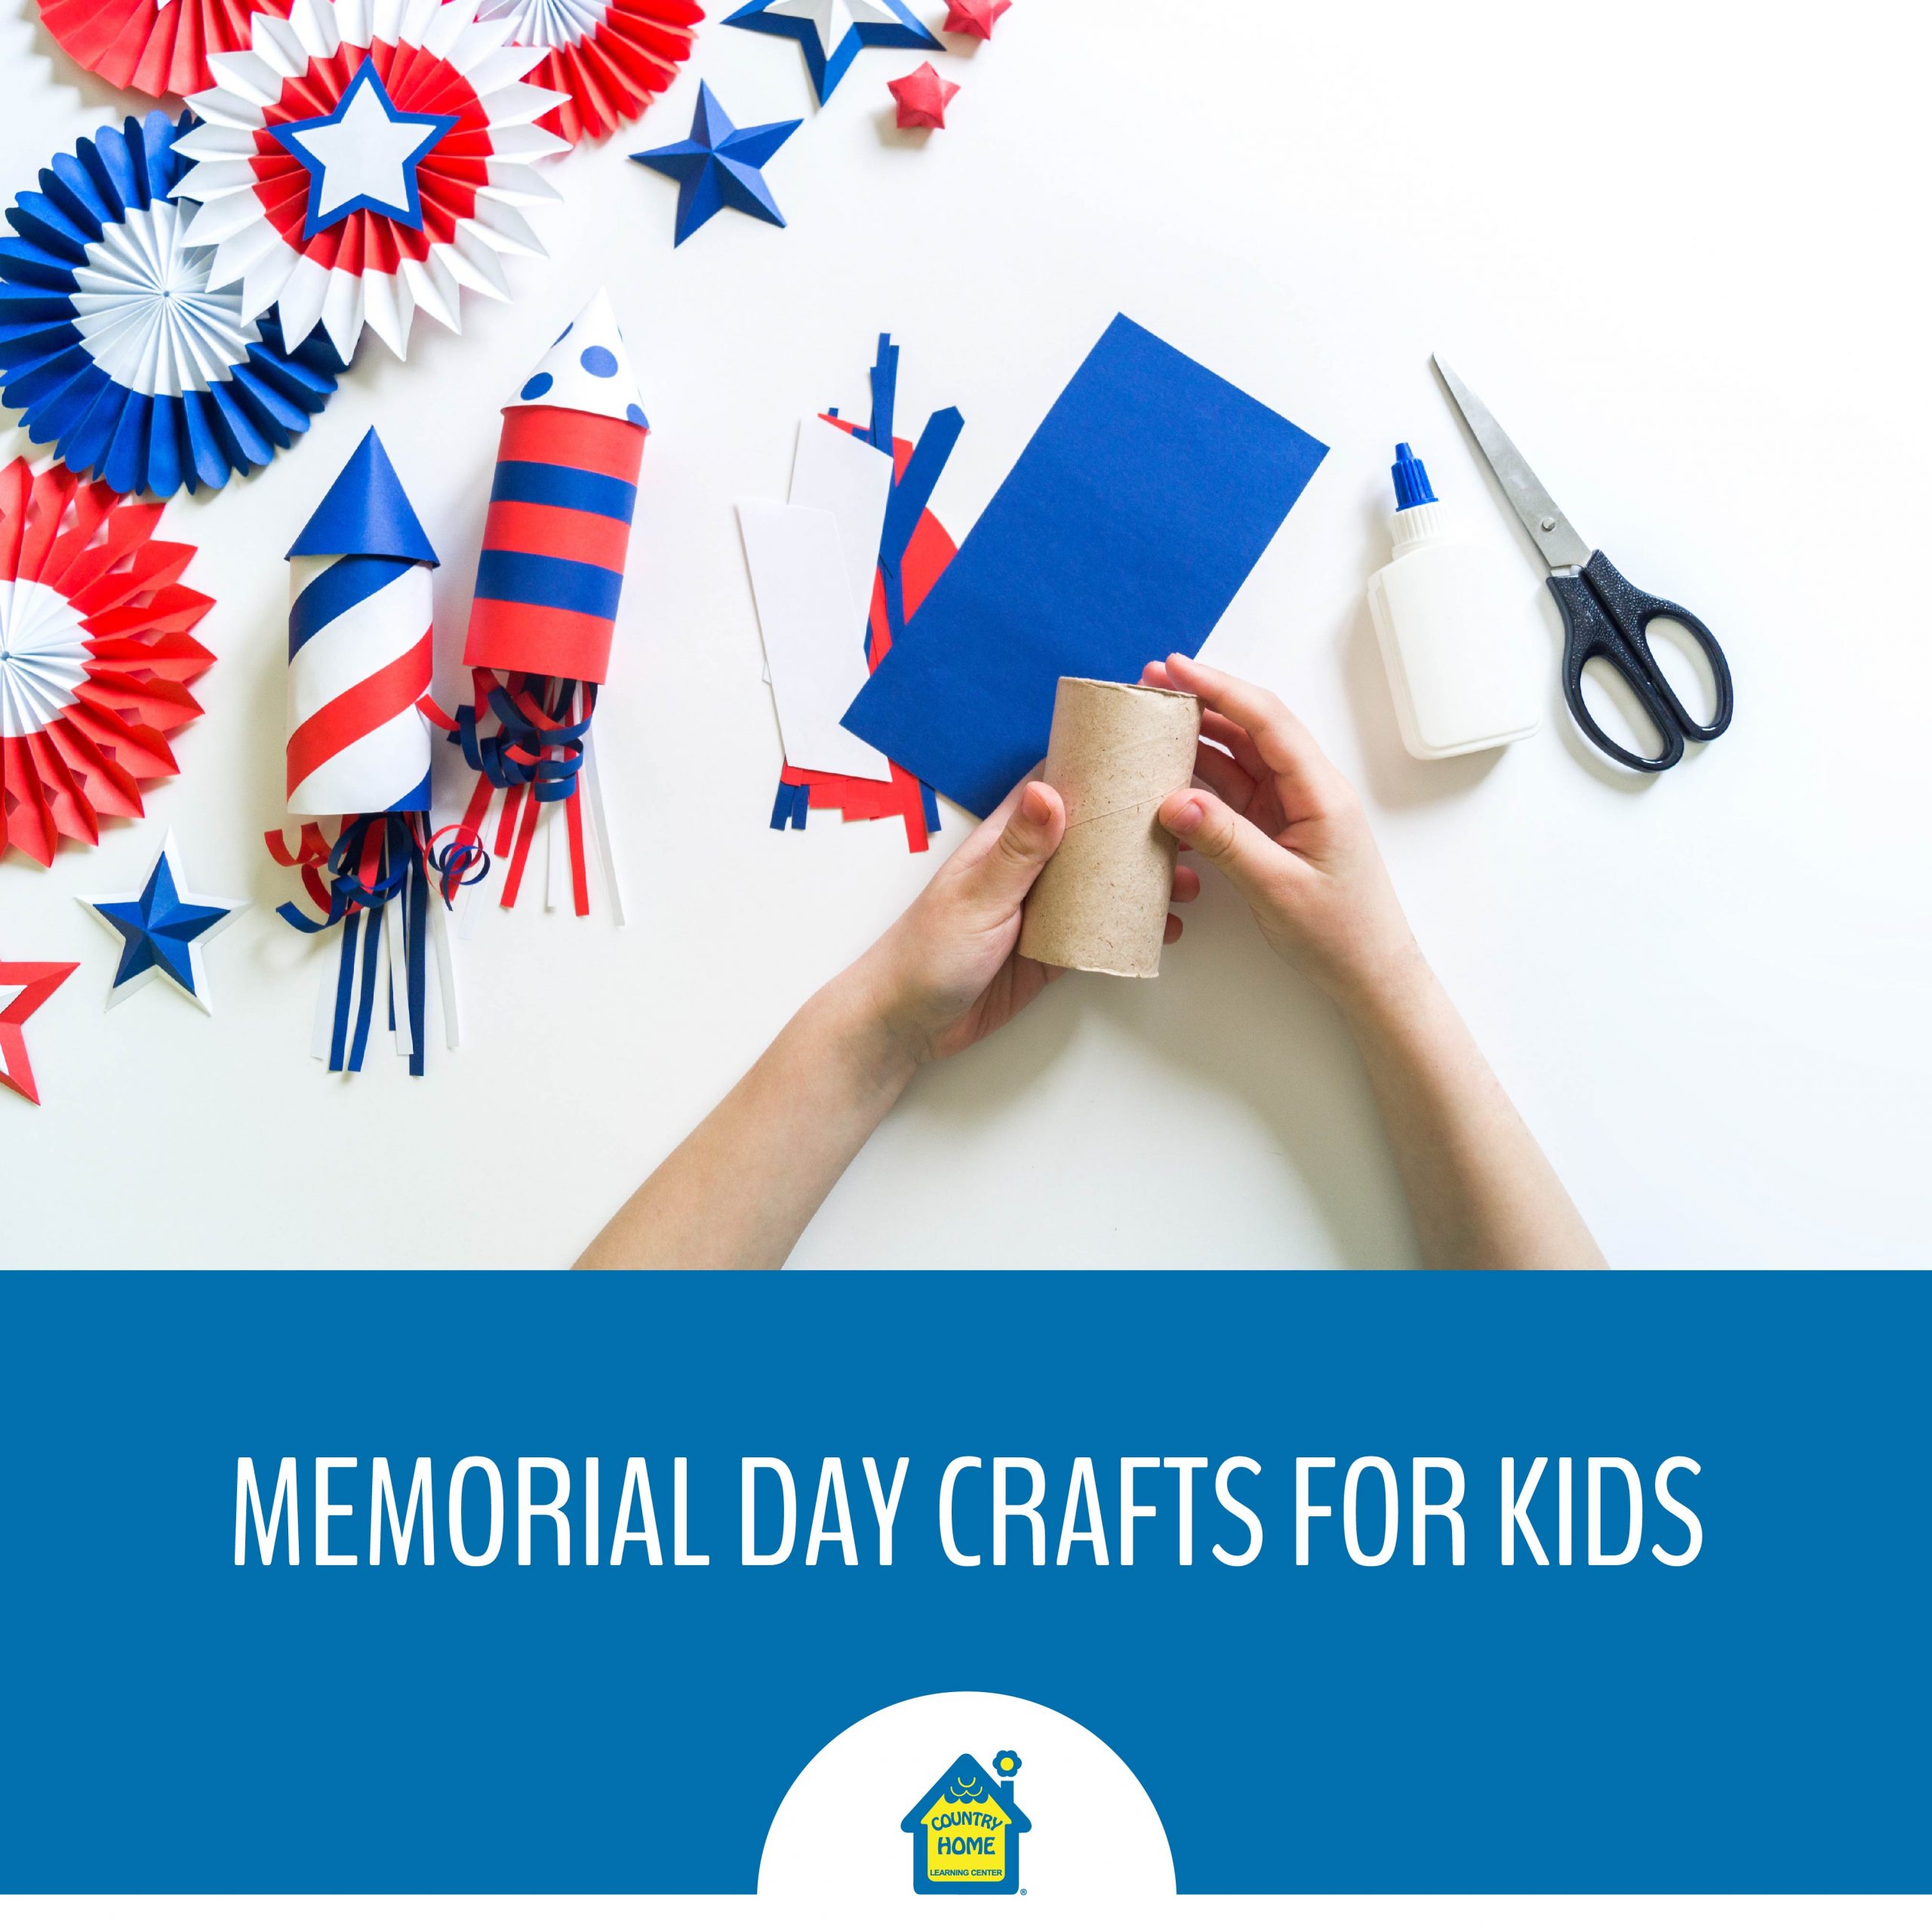 memorial-day-crafts-for-kids-country-home-learning-center